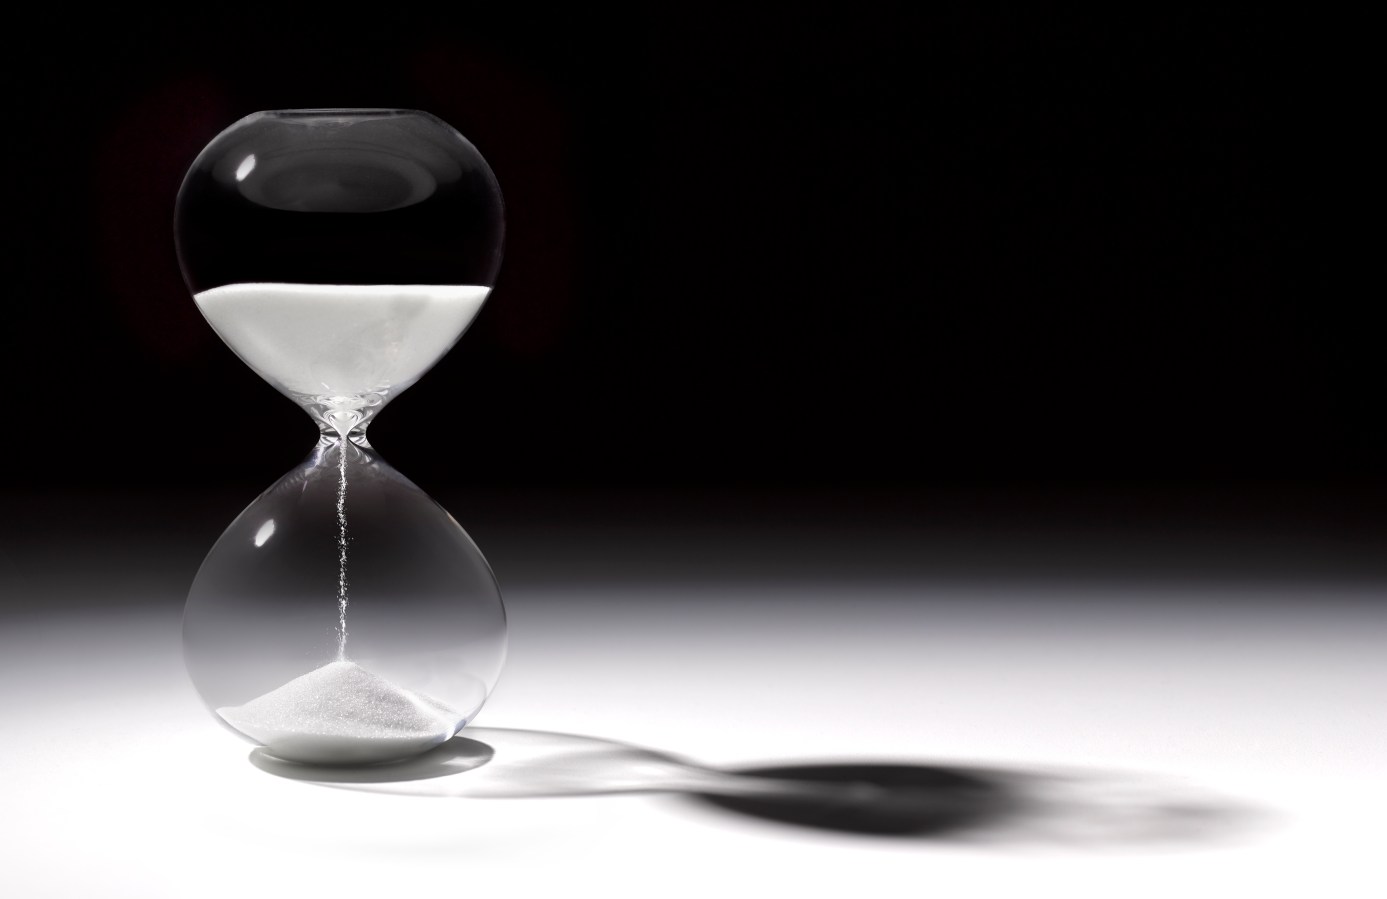 Hourglass dropping sand to display time passing